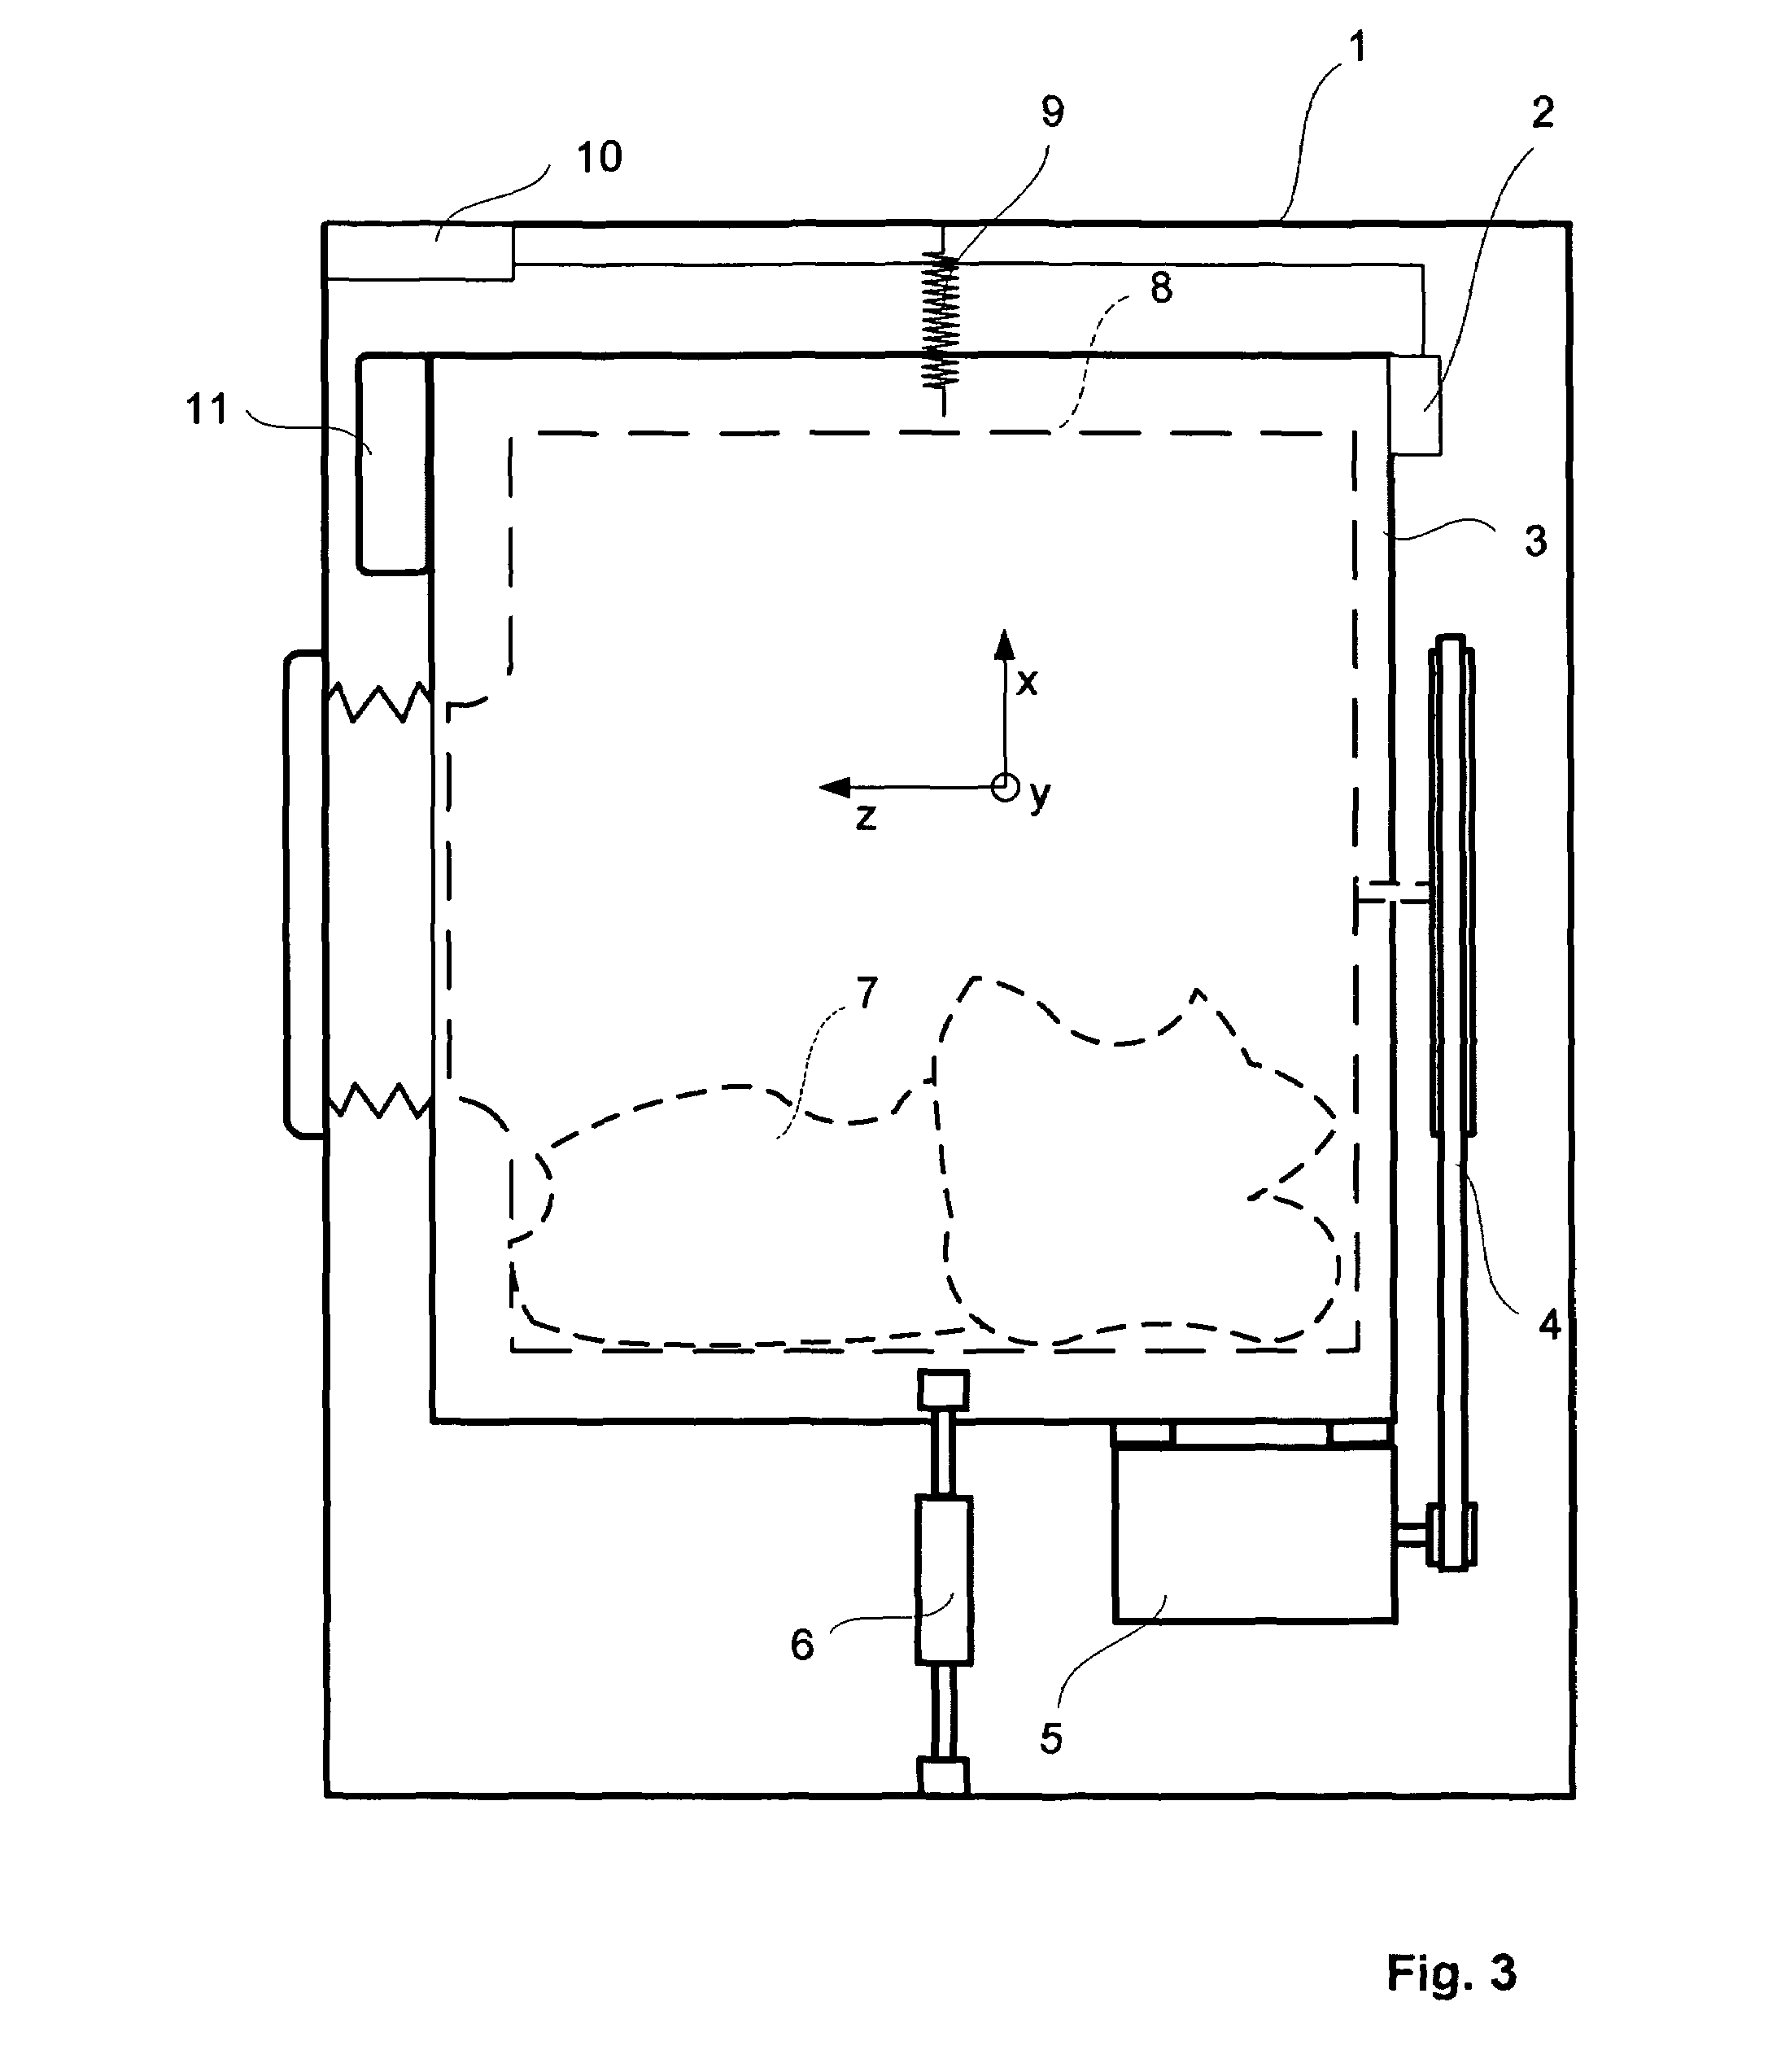 Method for the control of a spinning cycle of a washing machine and a washing machine suitable for performing said method